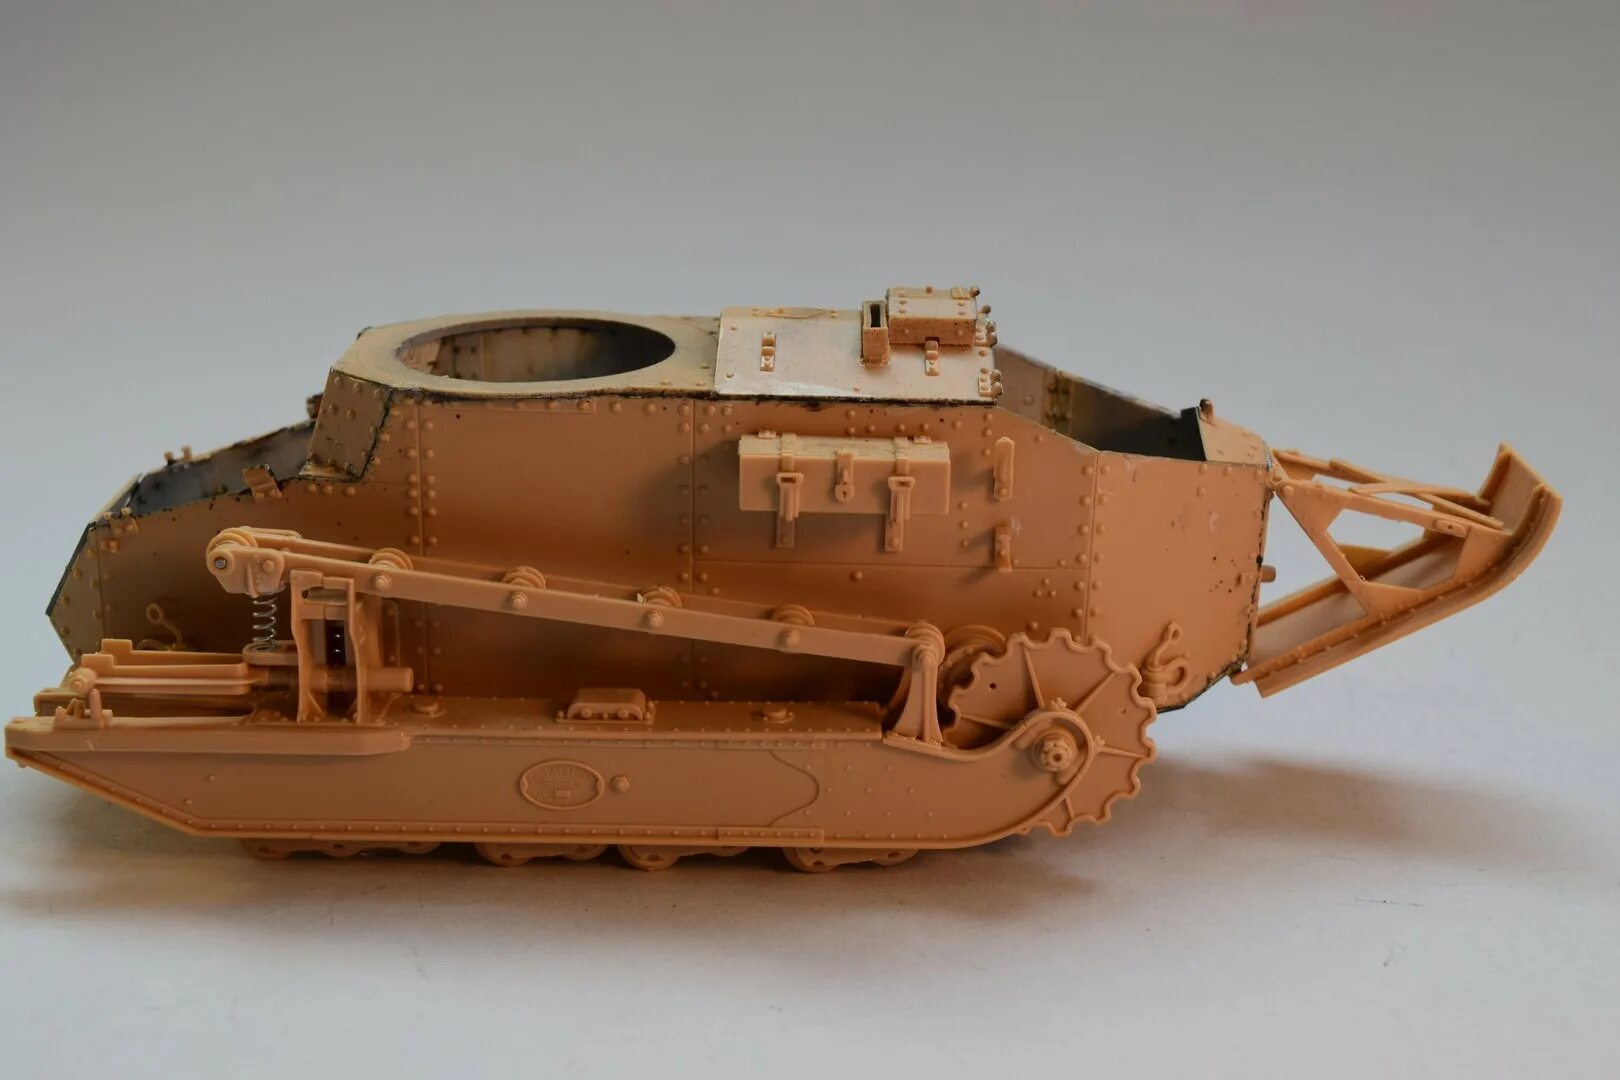 Рено ФТ 17. Renault ft17 MBT. Рено ФТ-18 Менг 1/35. Рено ФТ 17 САУ.